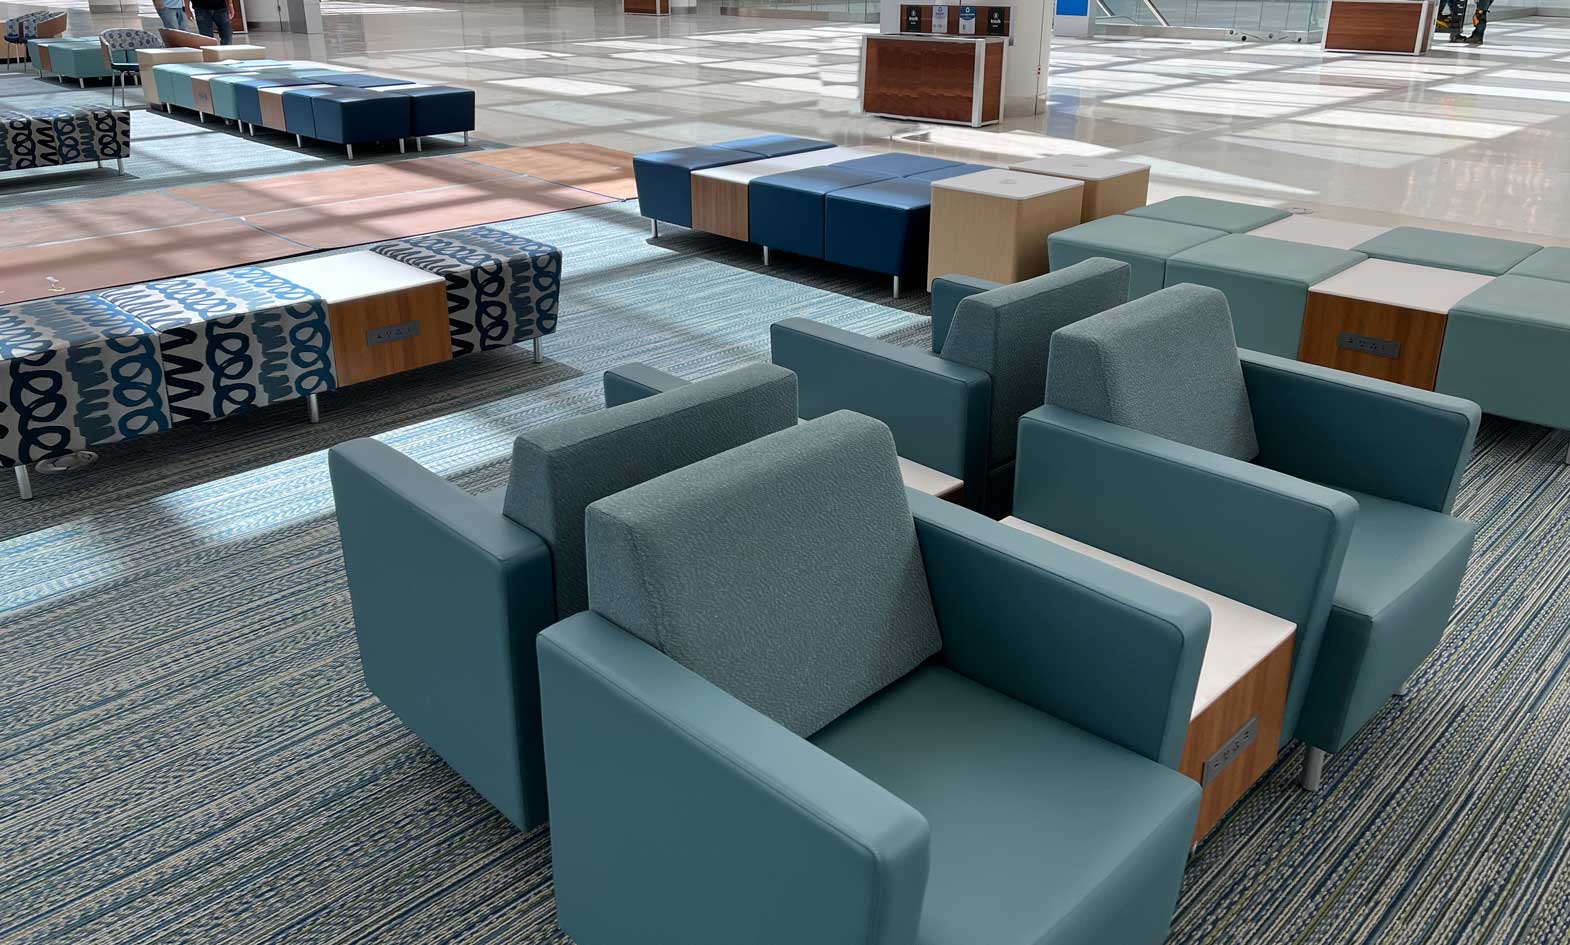 Airport seating with lounge chairs, benches and powered occasional tables